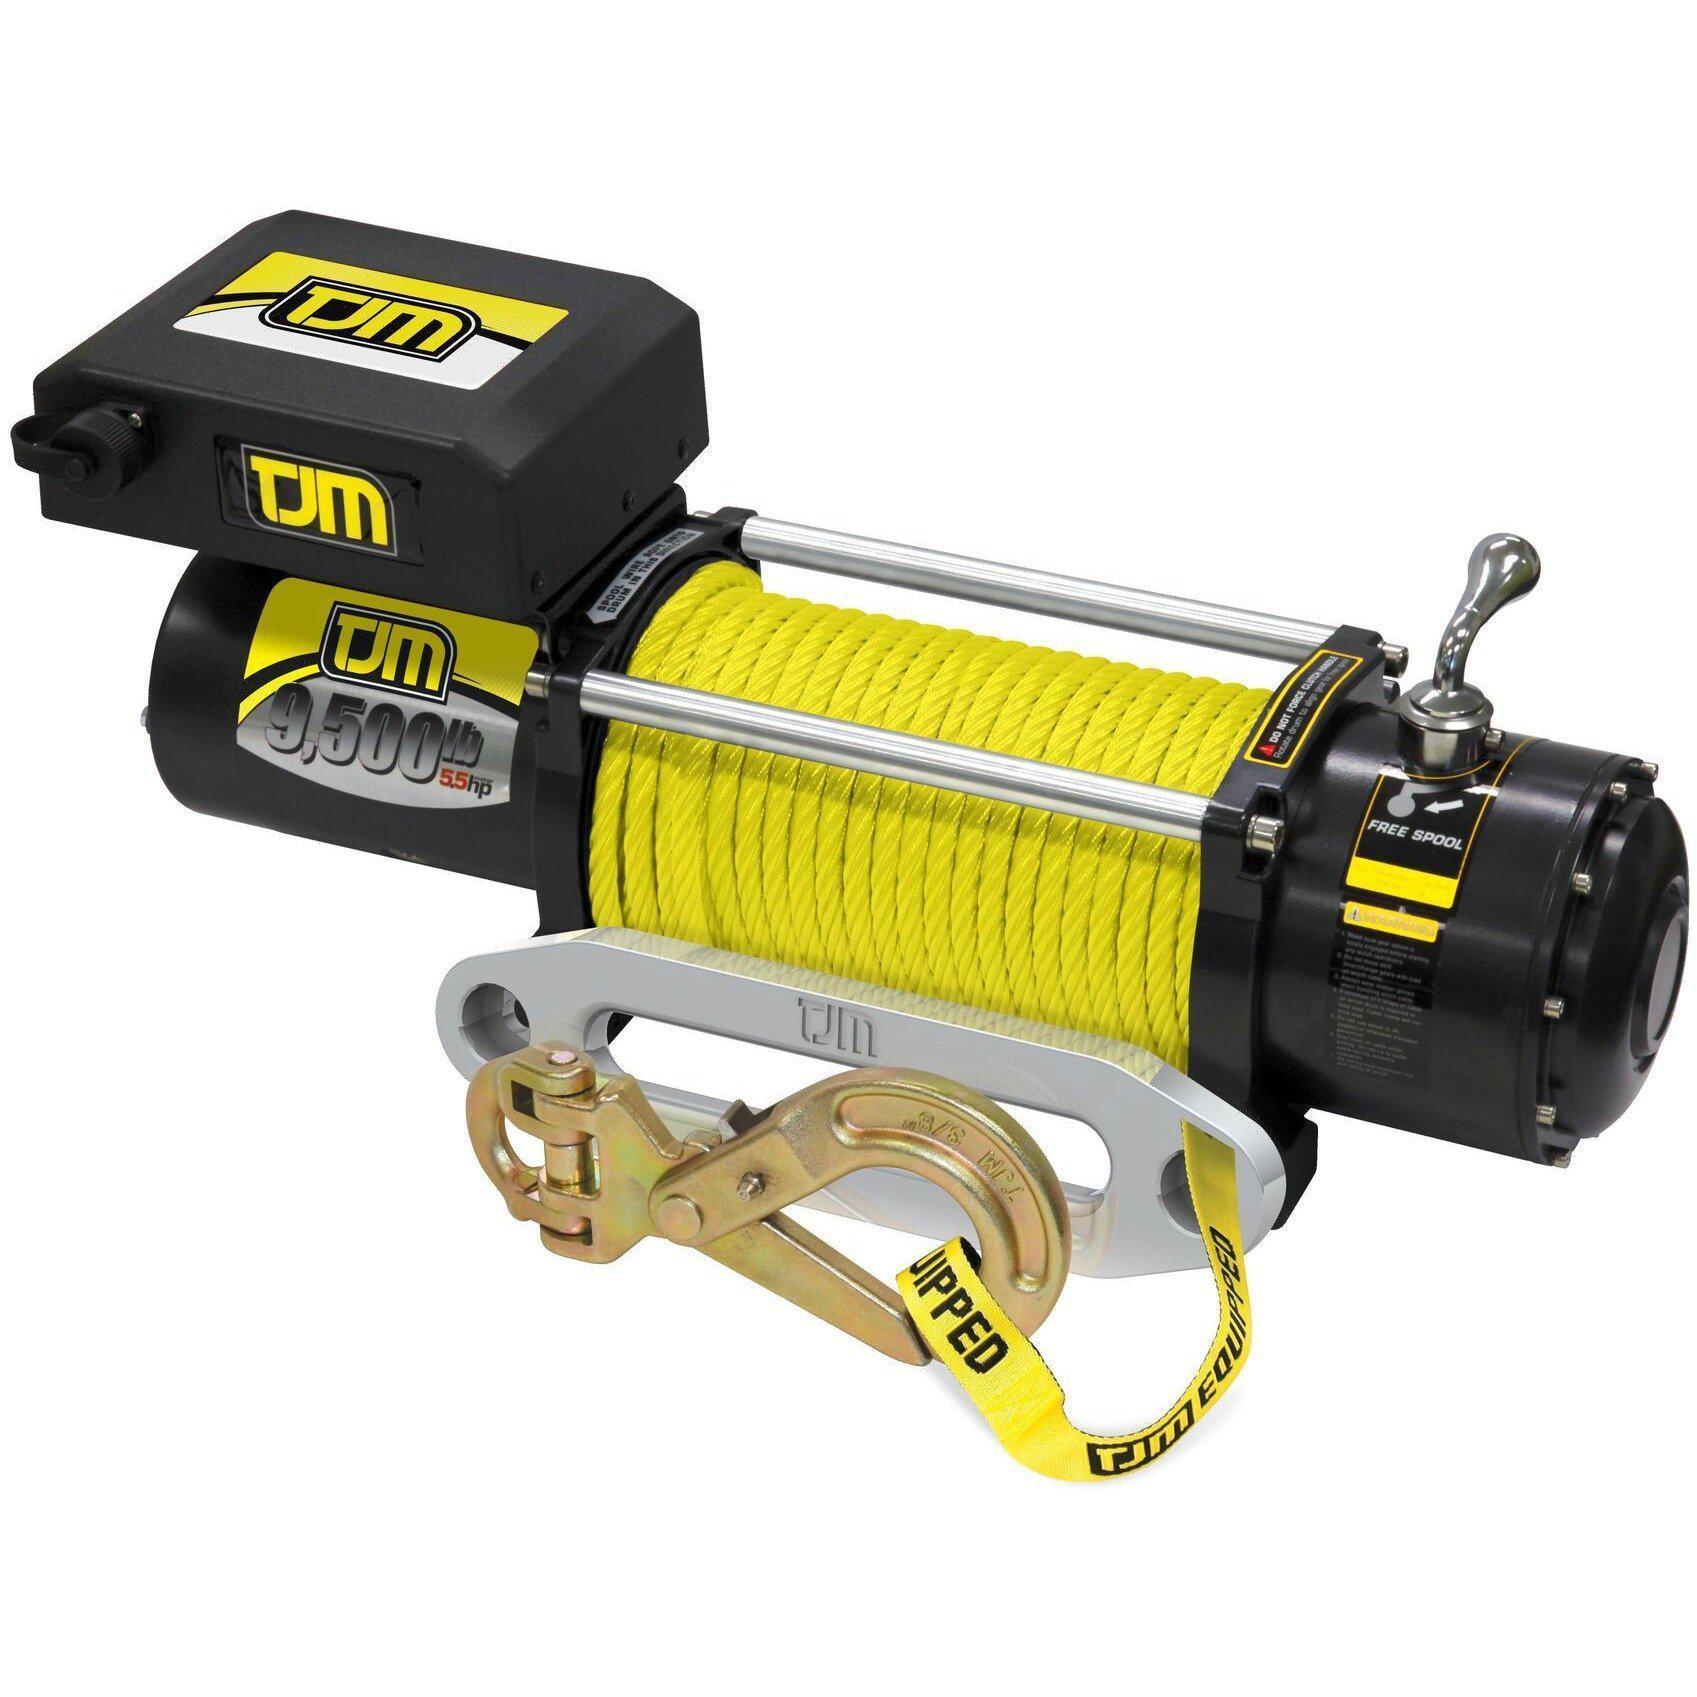 the TJM Torq Winch 9500LB with synthetic rope and wireless motor for sale online at off road tents